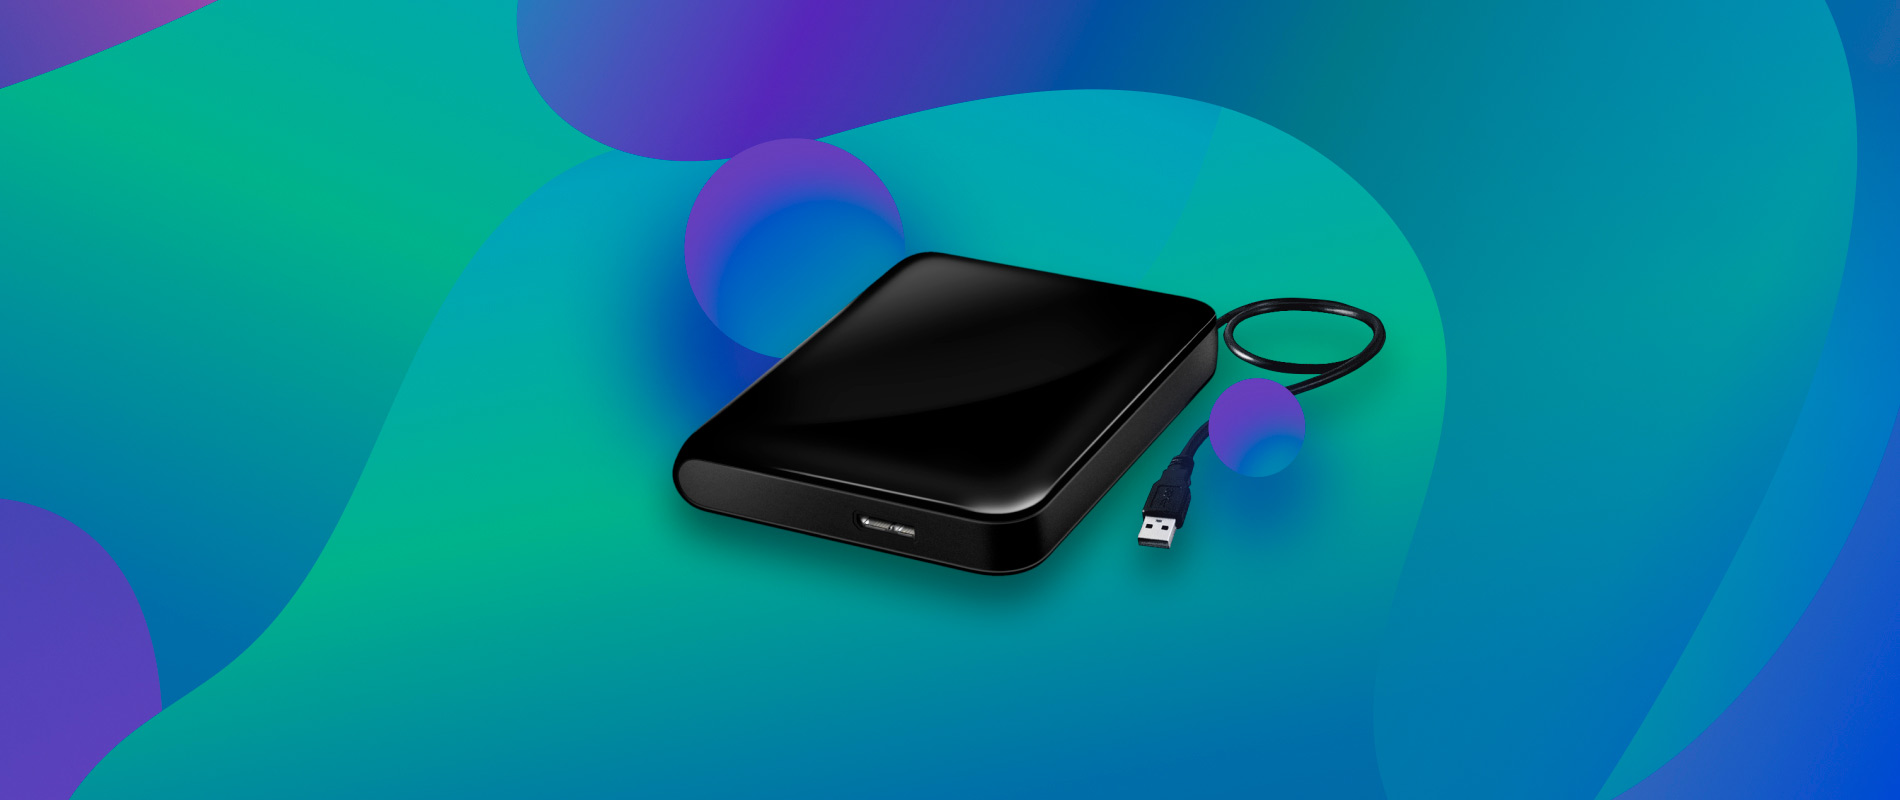 External Hard Drive Data Recovery In 2022 Free Guide